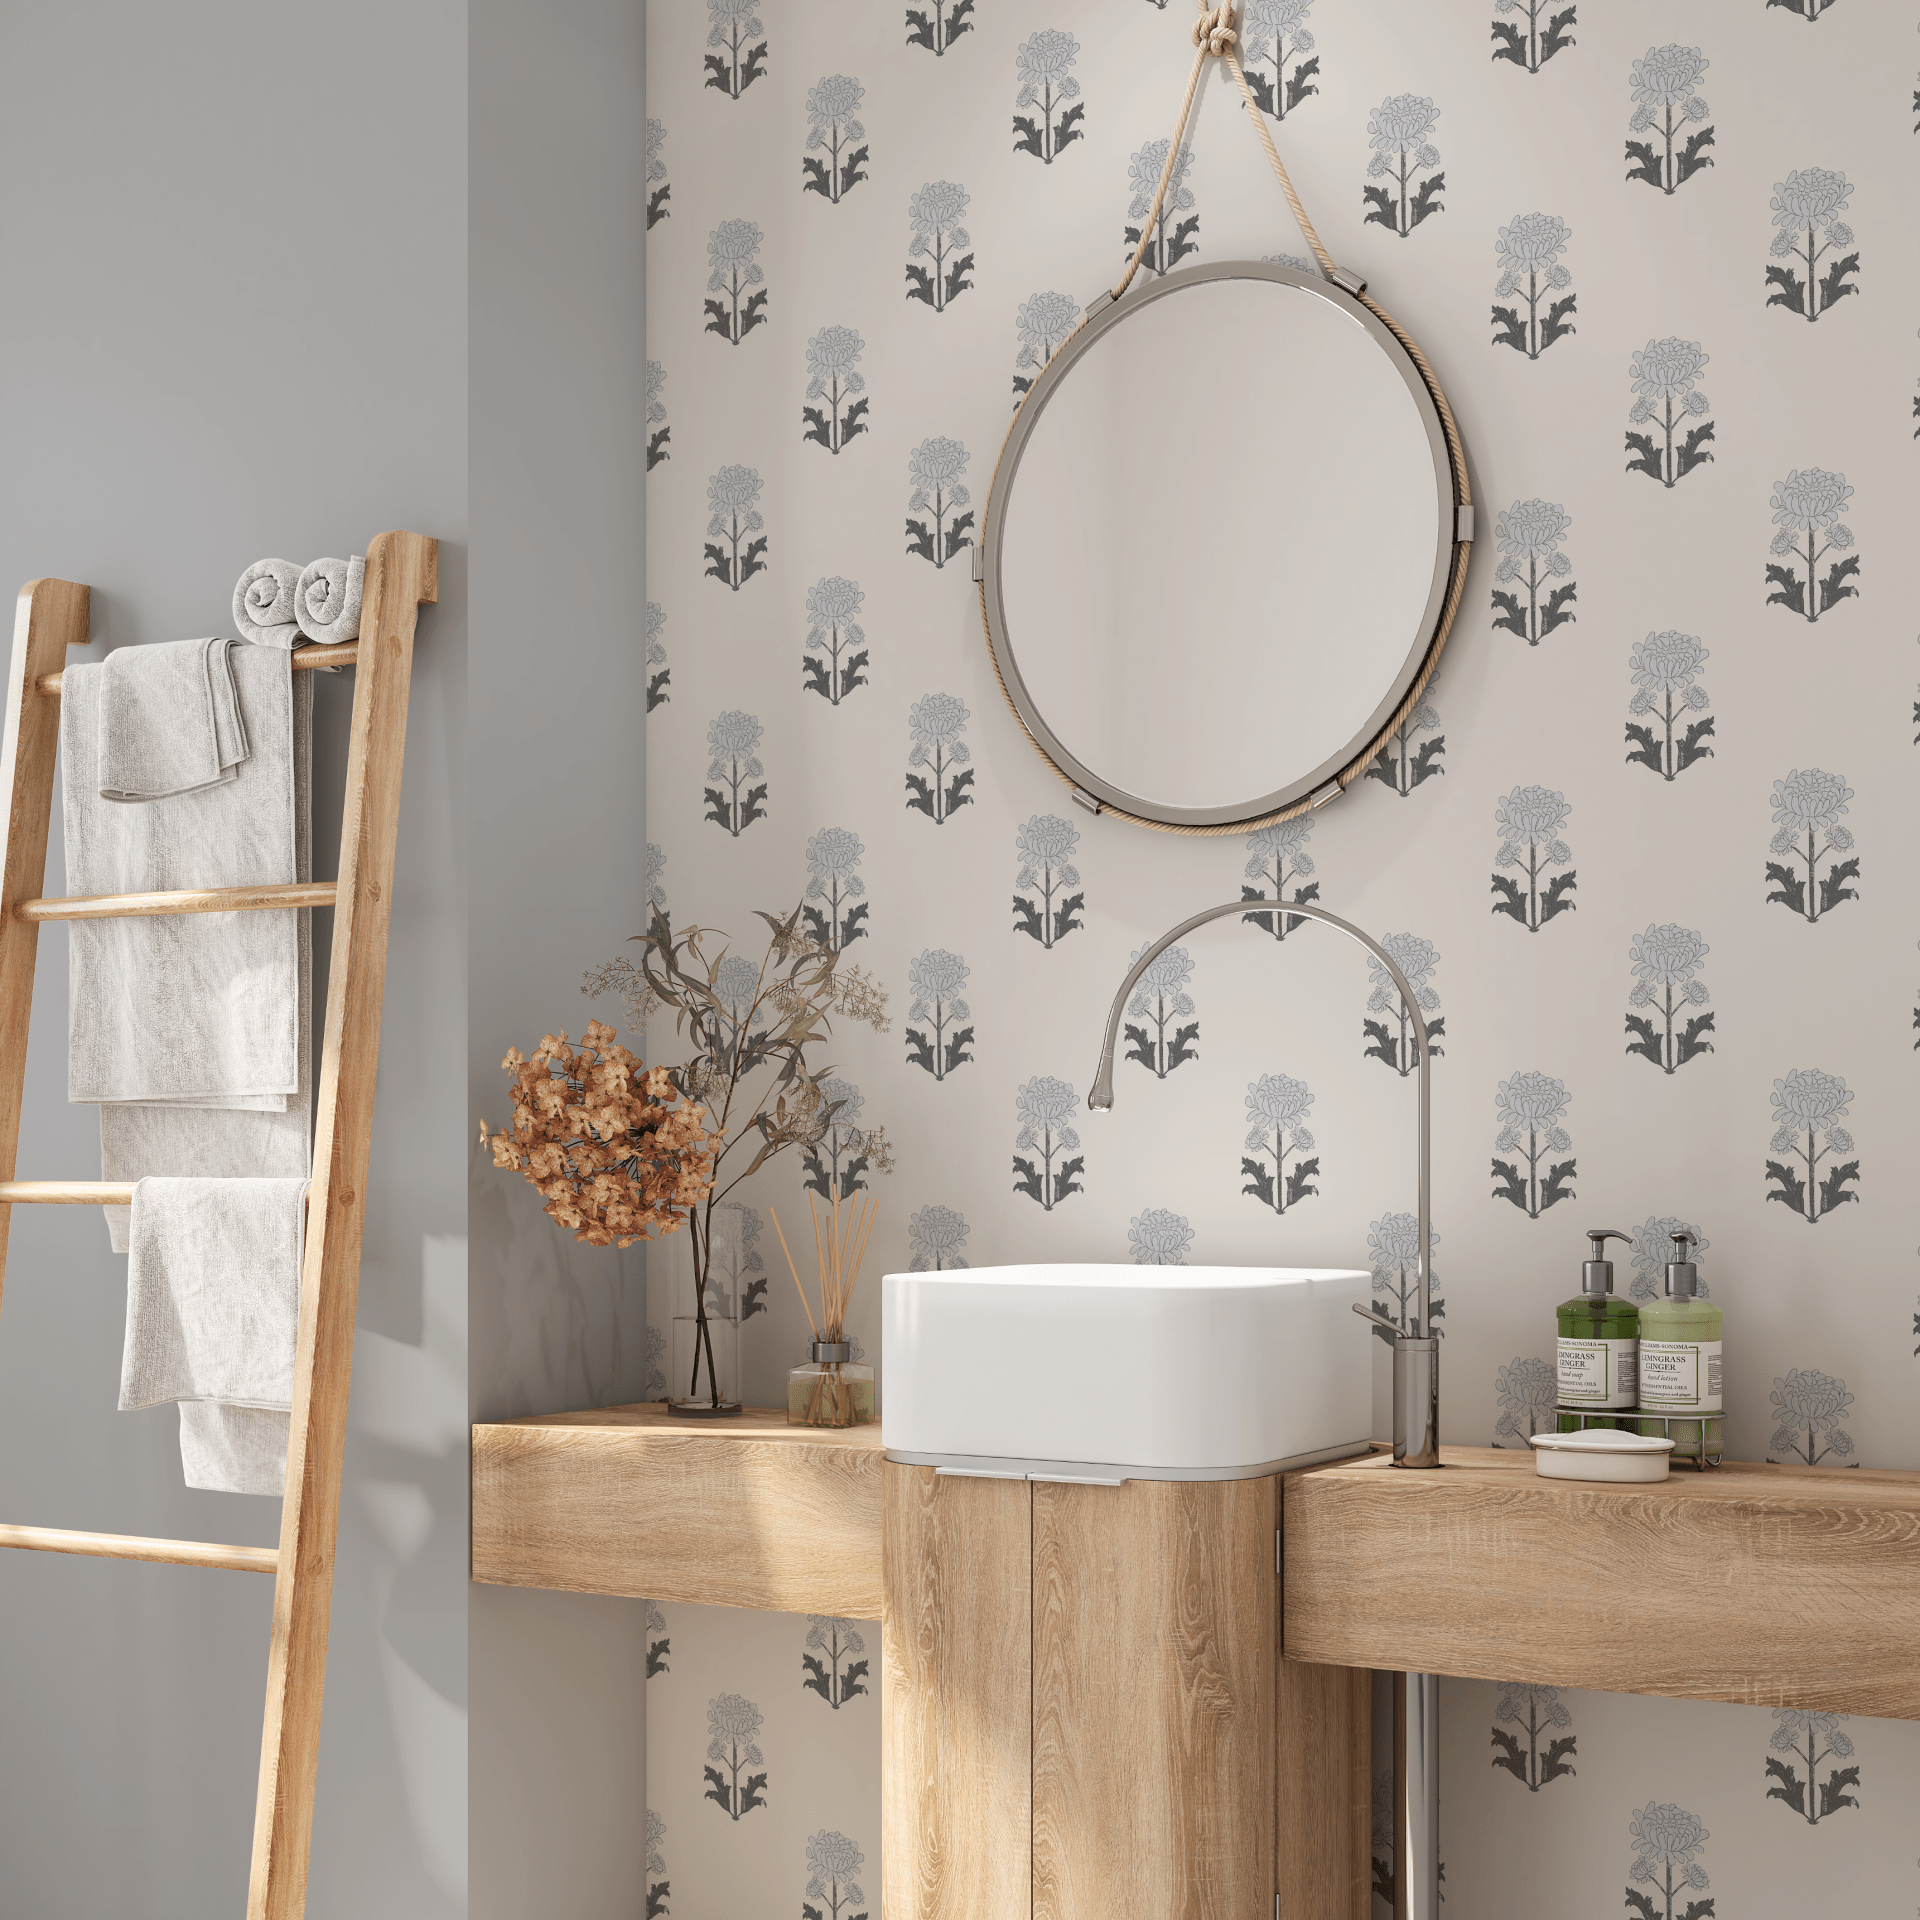 A modern bathroom with a wall adorned in floral blueprint self-adhesive wallpaper. A round mirror hangs above a wooden vanity with a white basin, complemented by dried flowers and soft towels on a ladder rack beside it